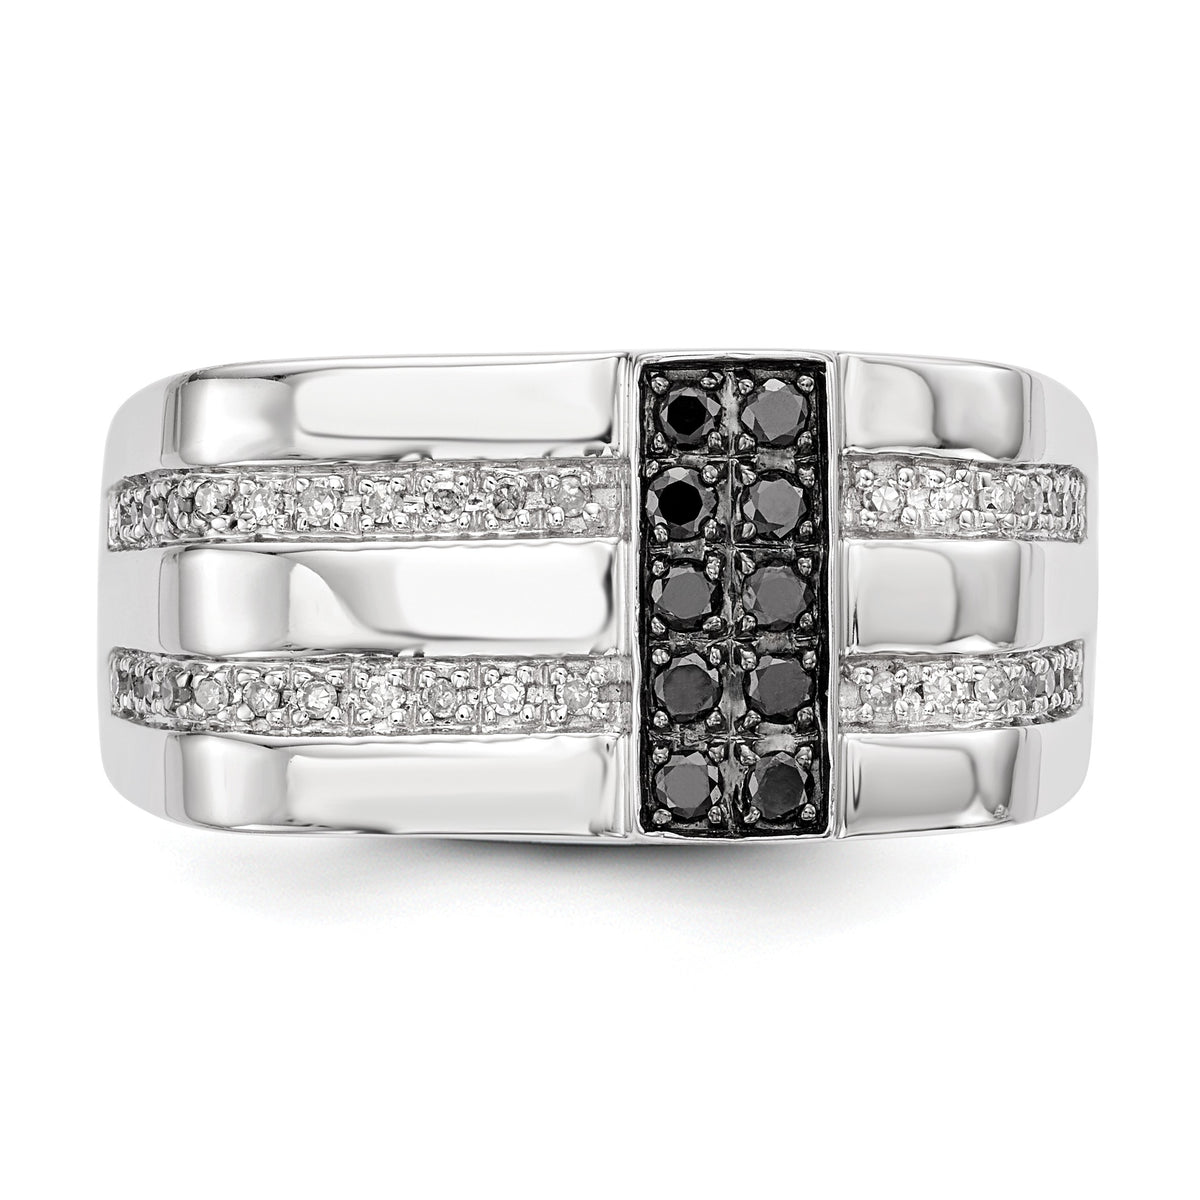 Alternate view of the Mens Sterling Silver 1/2 Ctw White &amp; Black Diamond Flat Top 11mm Band by The Black Bow Jewelry Co.